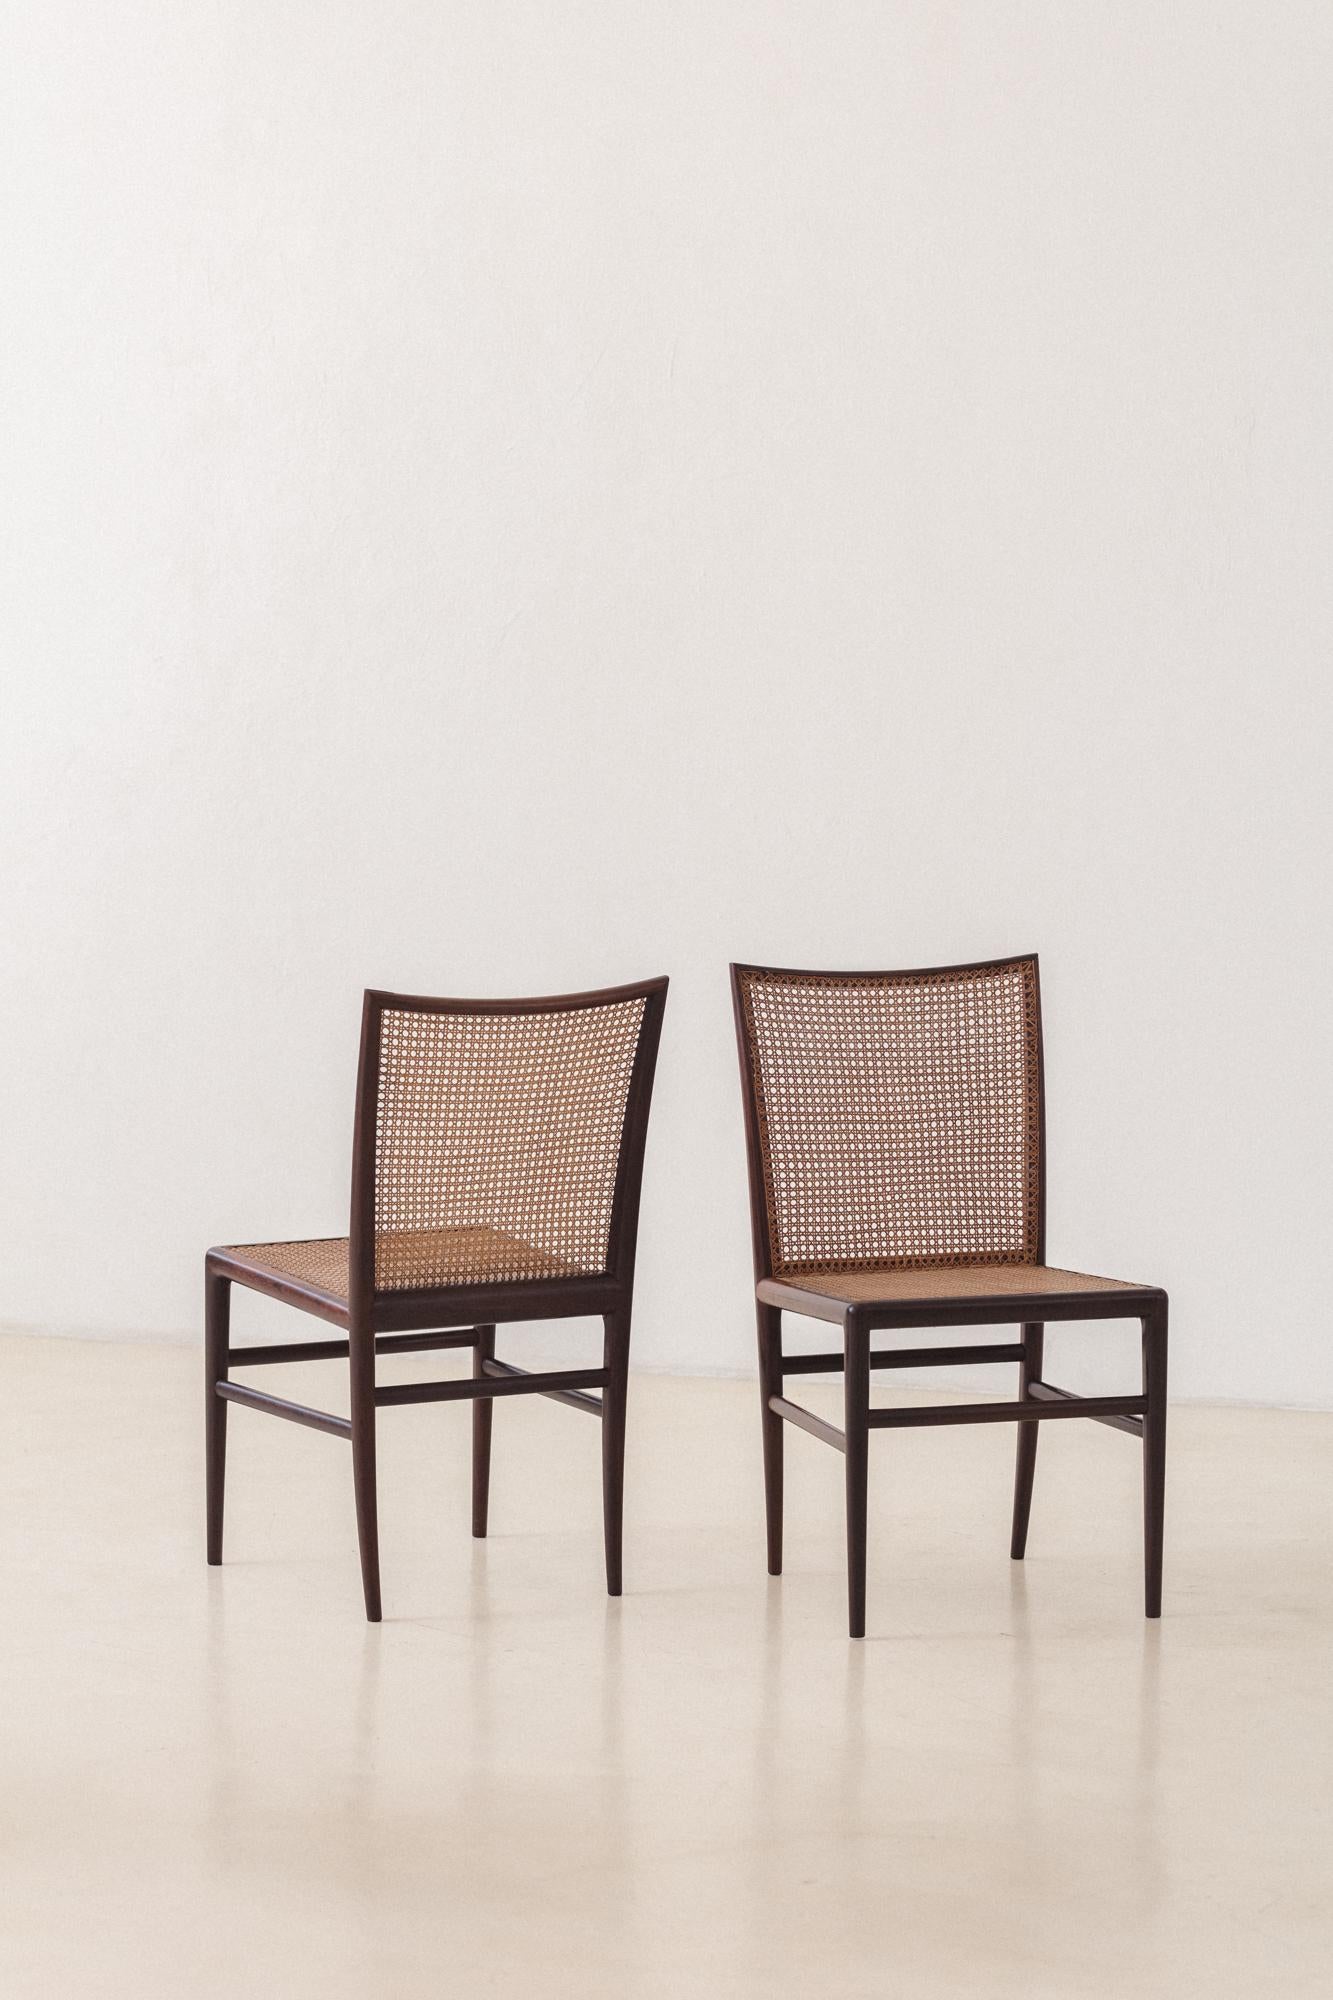 Straw Set of 8 Rosewood Cane Chairs, Branco & Preto, 1952, Brazilian Midcentury For Sale